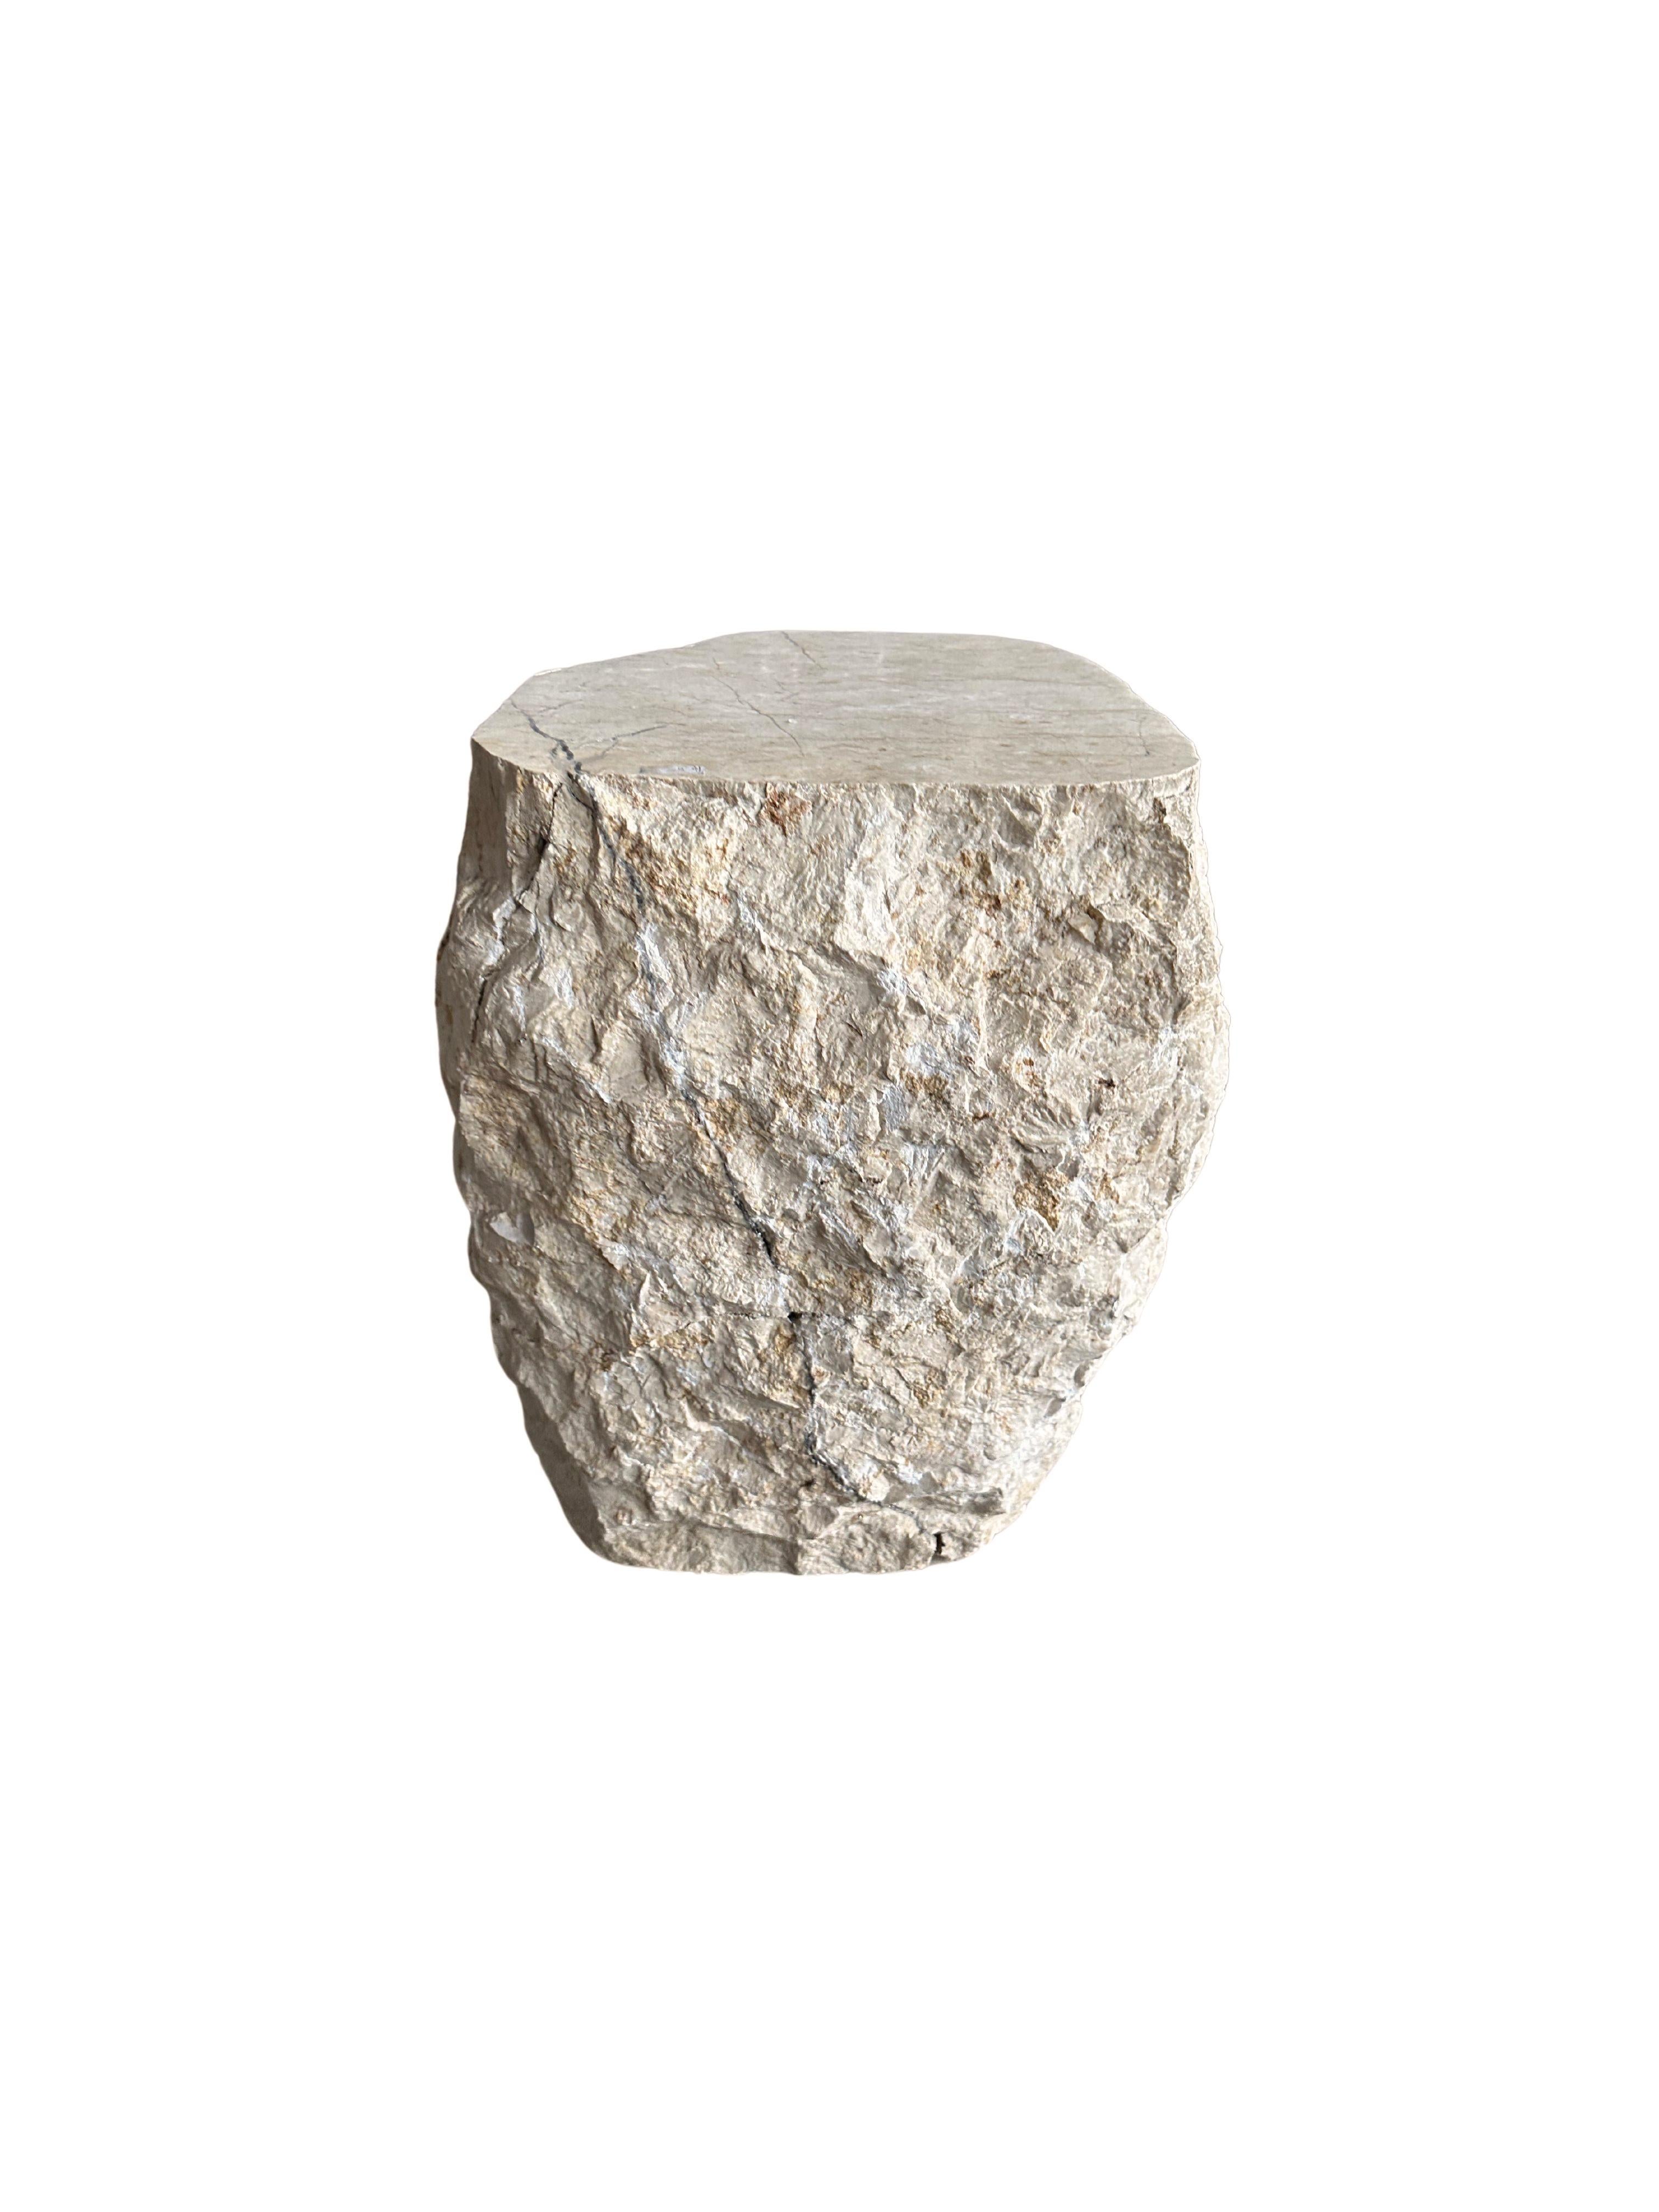 A wonderfully organic solid marble side table with a polished top and hand chiseled sides. The mix of textures and shades adds to its charm.

*The images provided in this listing are a sample of the finished product and all final products will